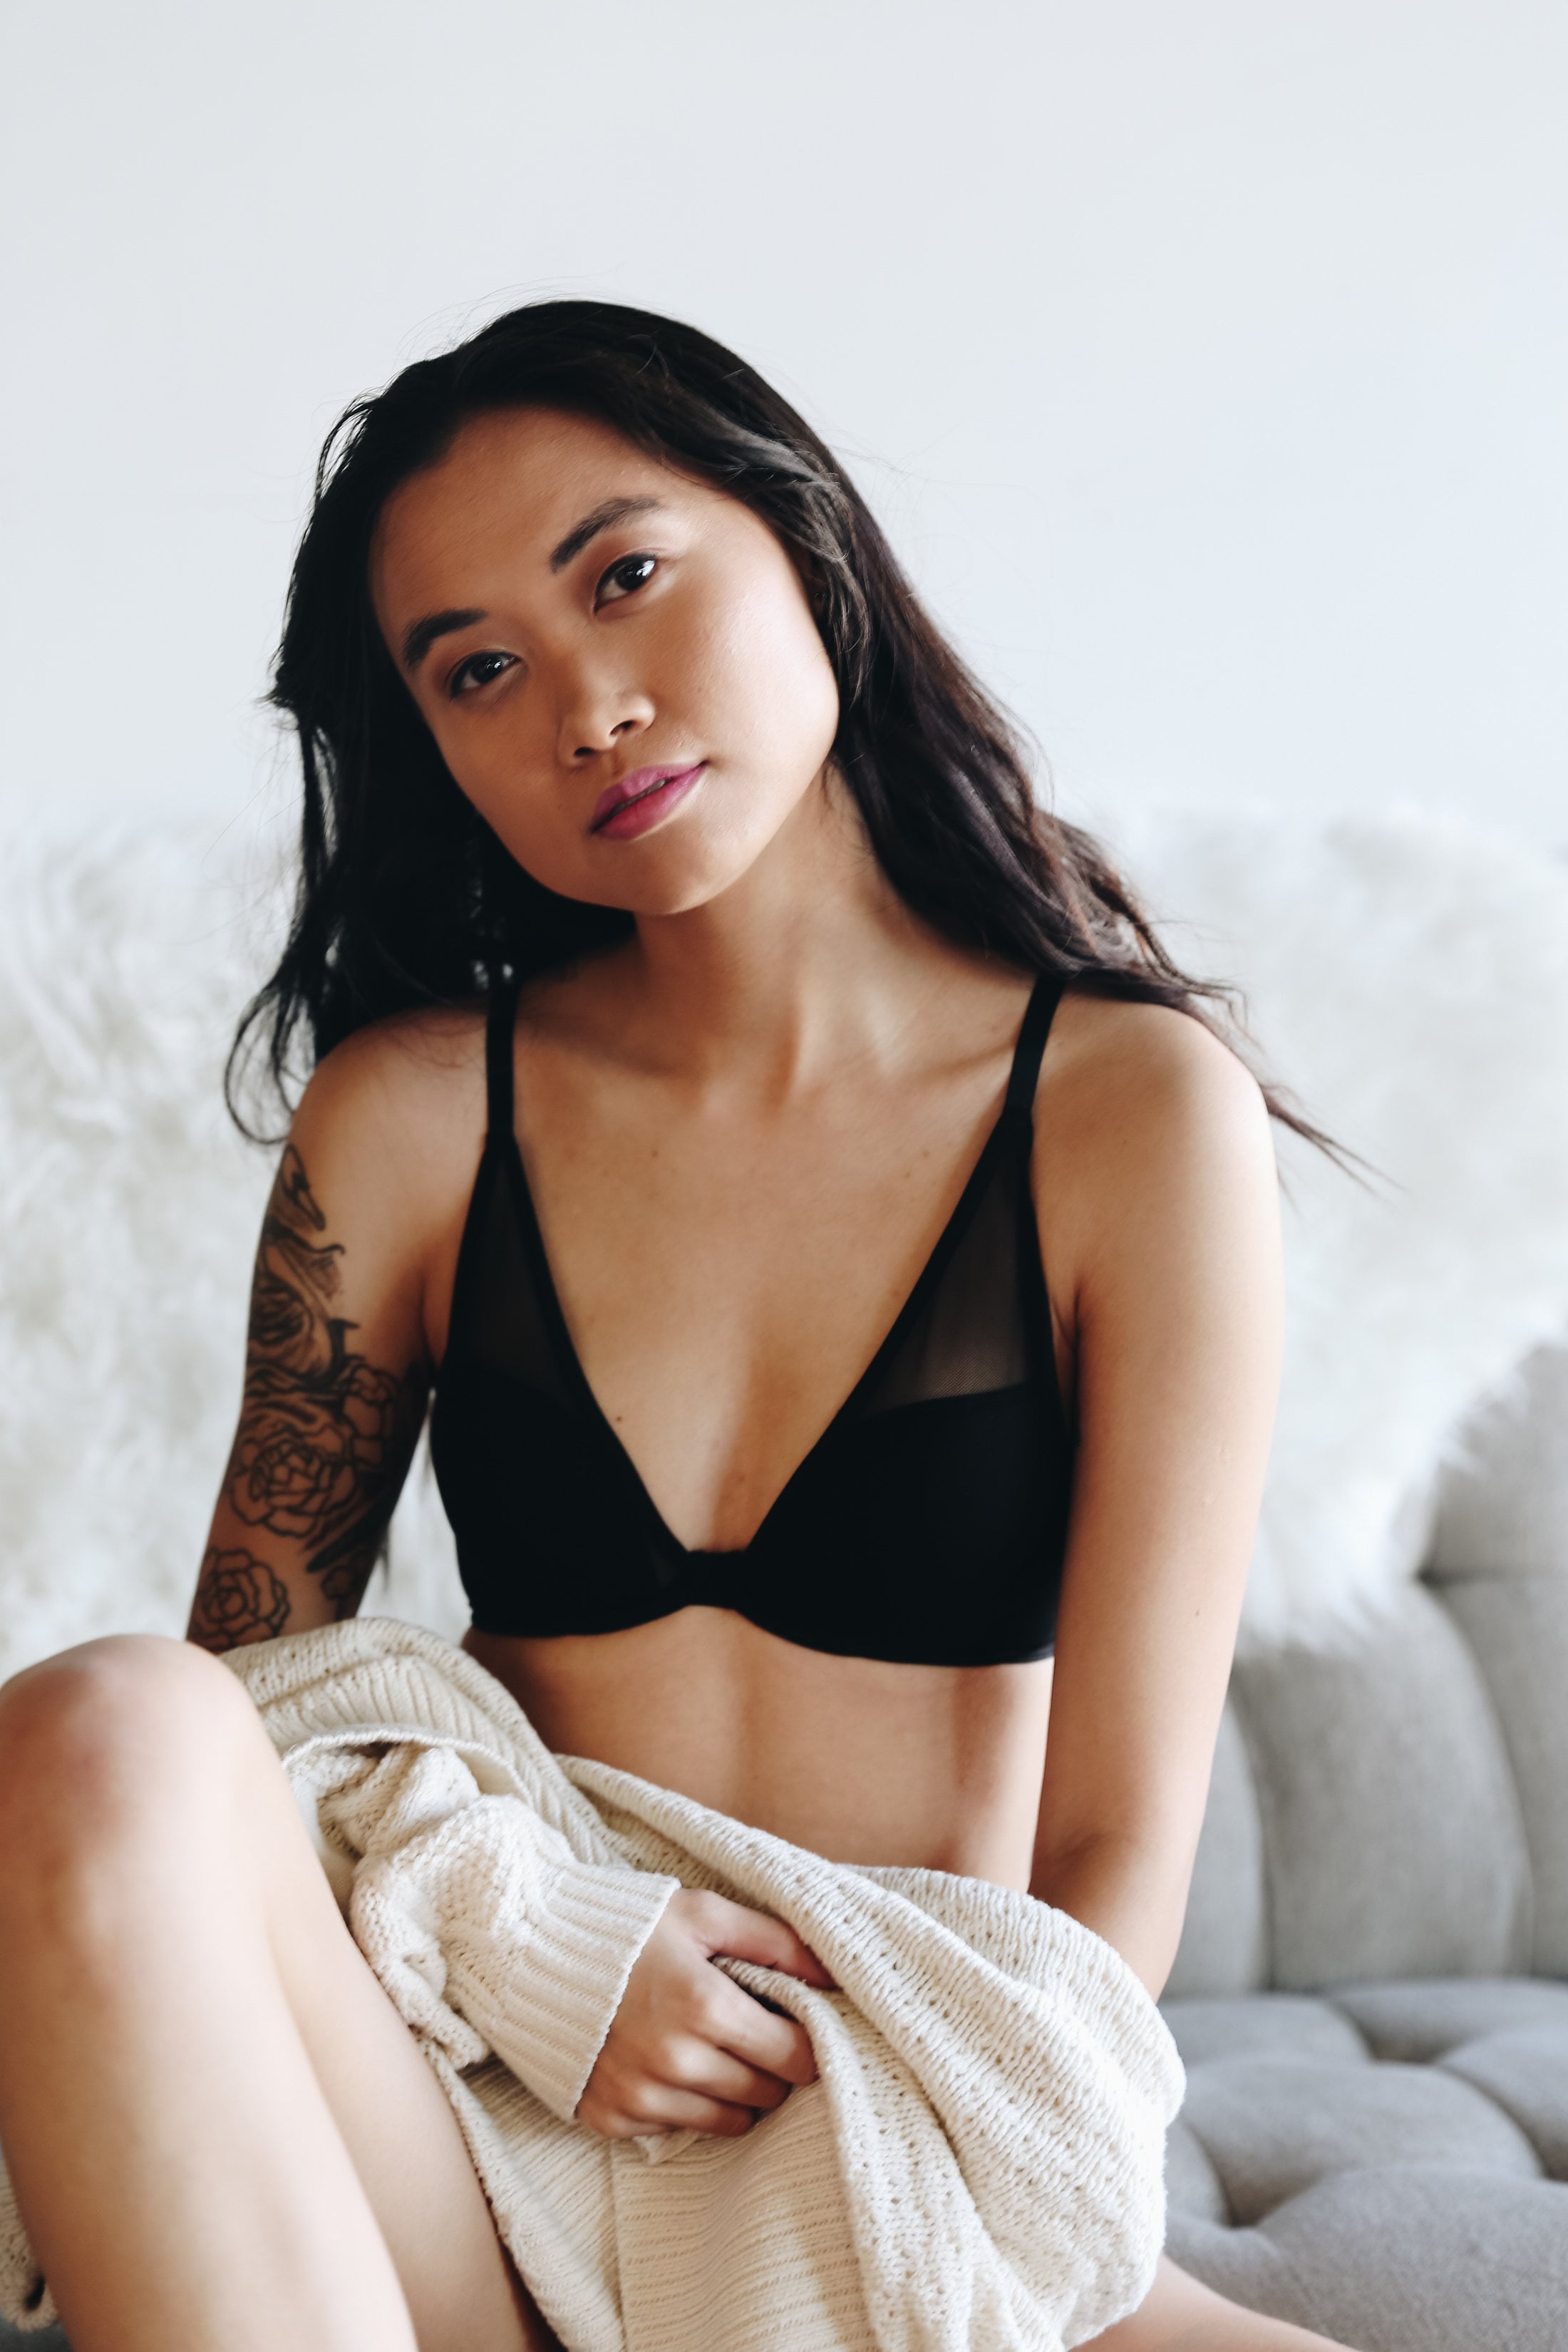 Meet the Lace Lift Up Bra for Small Boobs